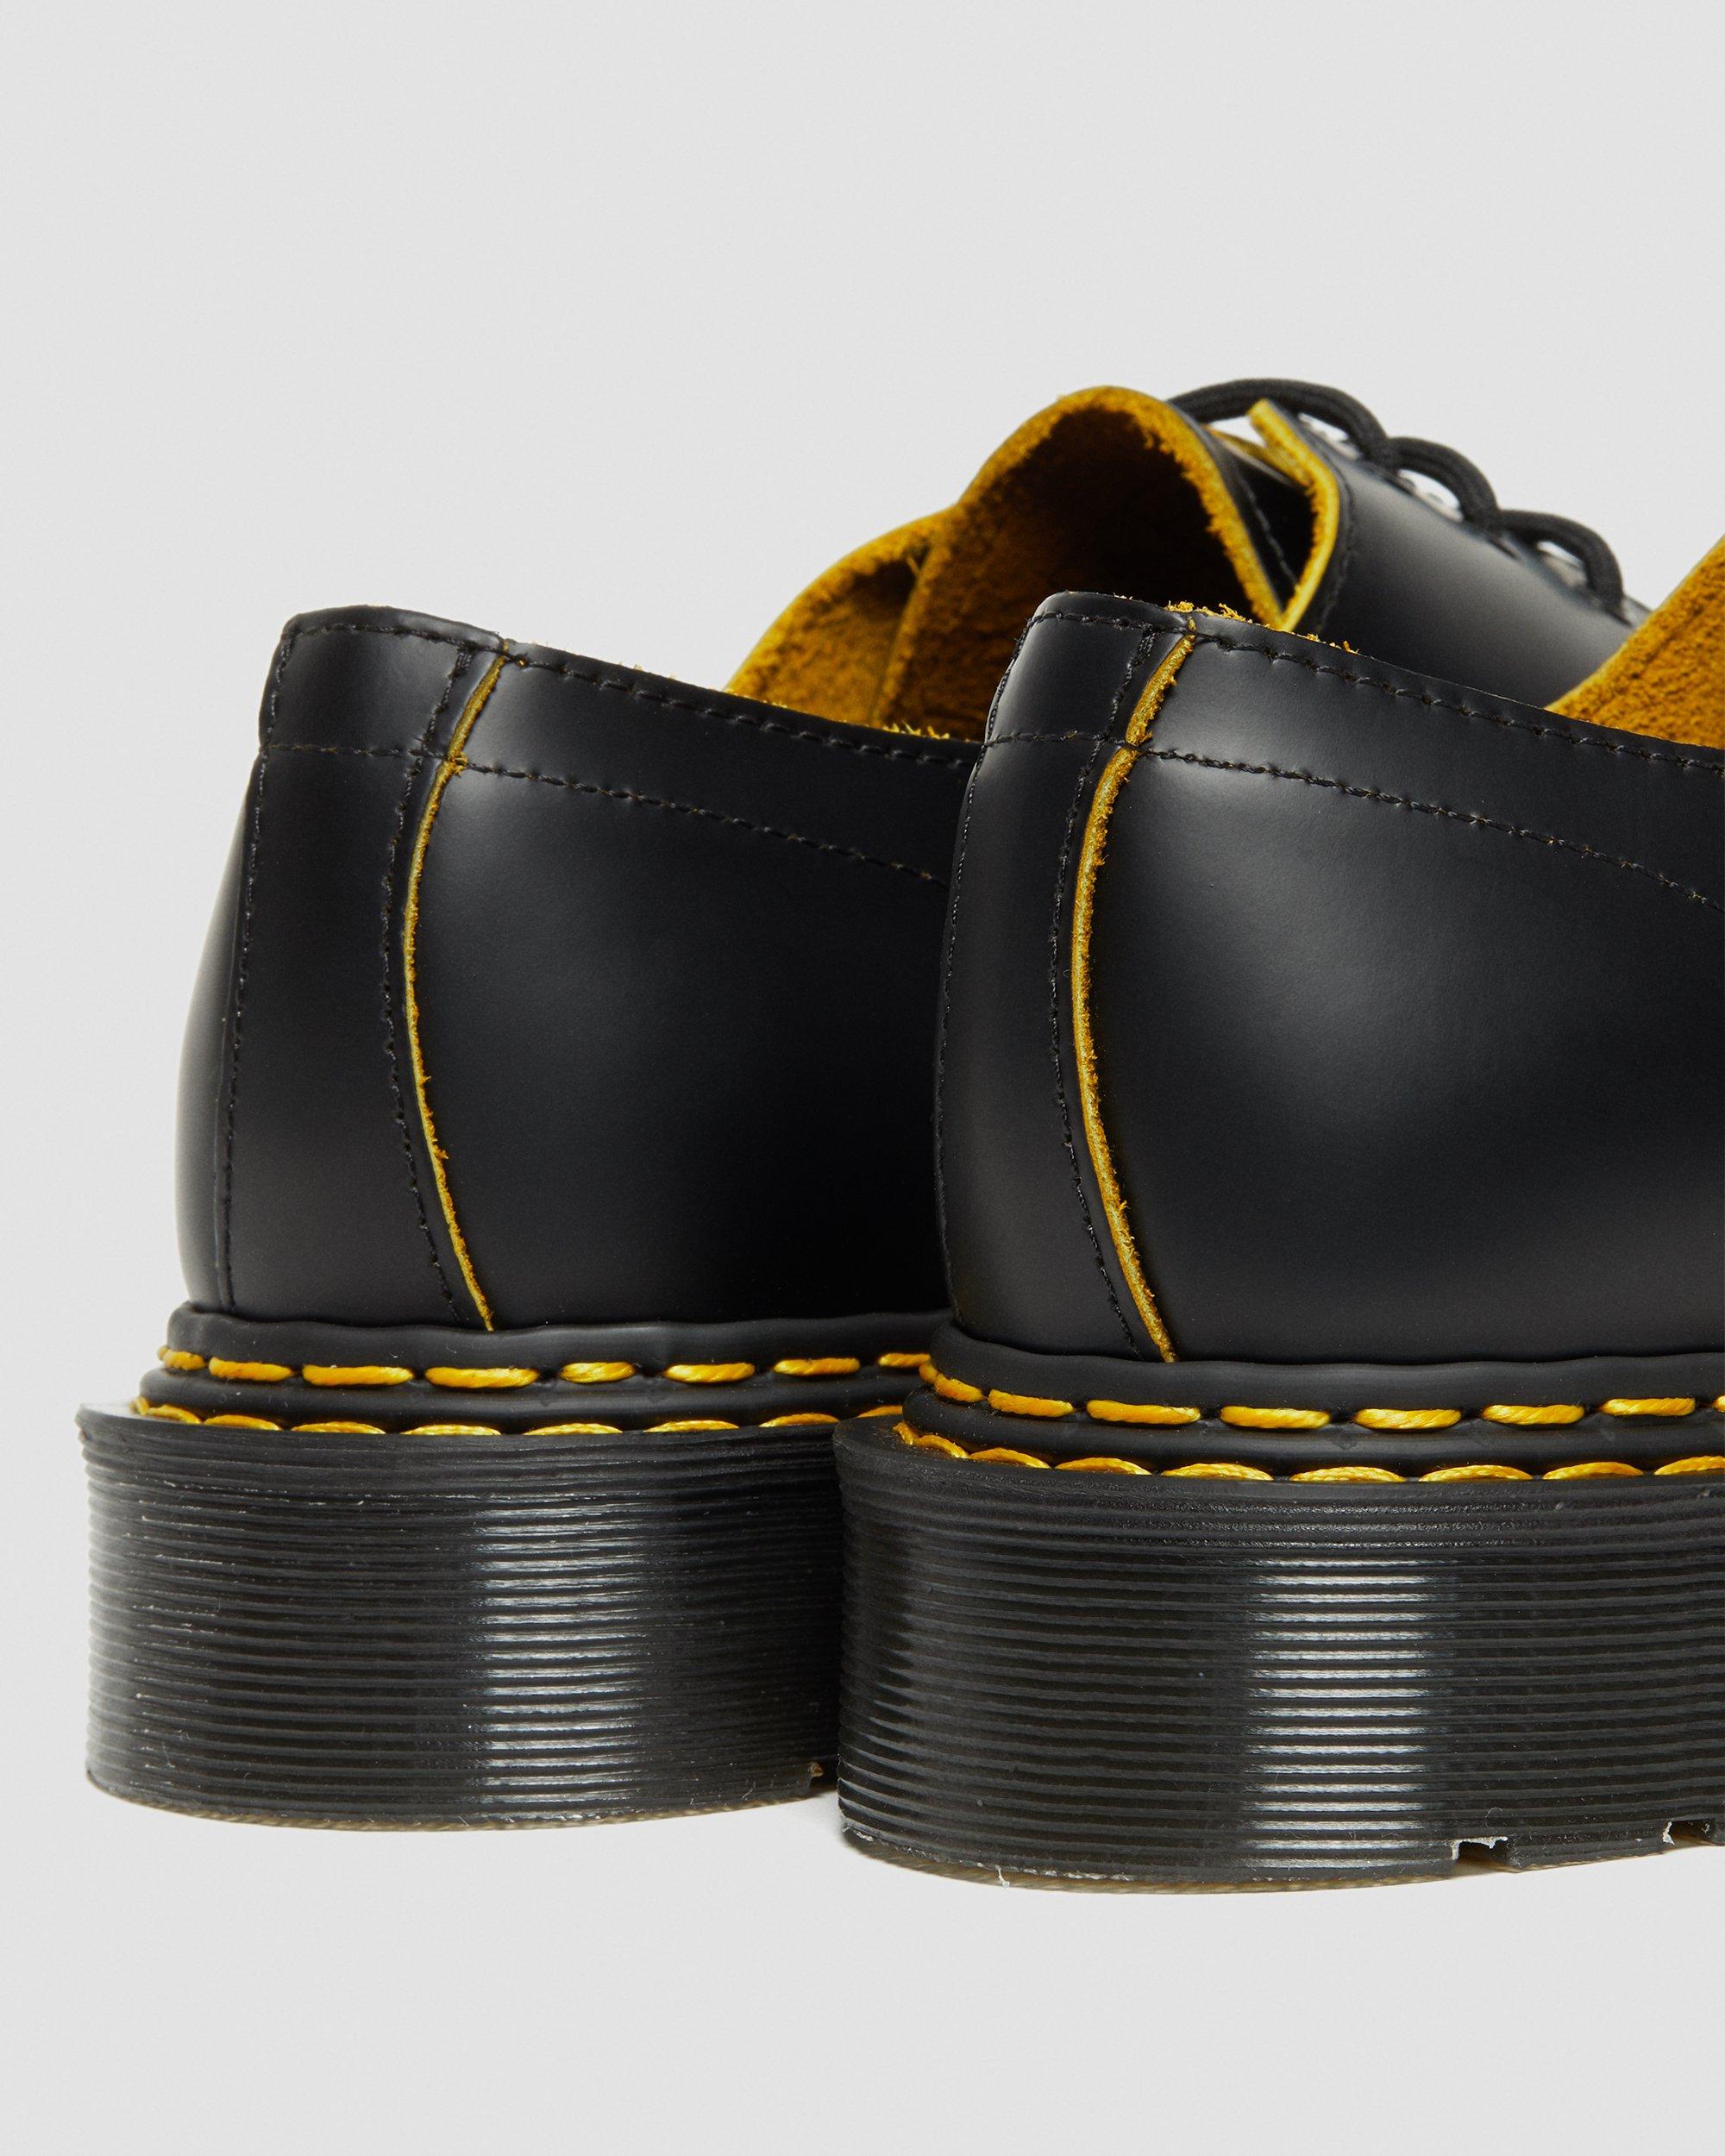 DR MARTENS 1461 Double Stitch Leather Oxford Shoes